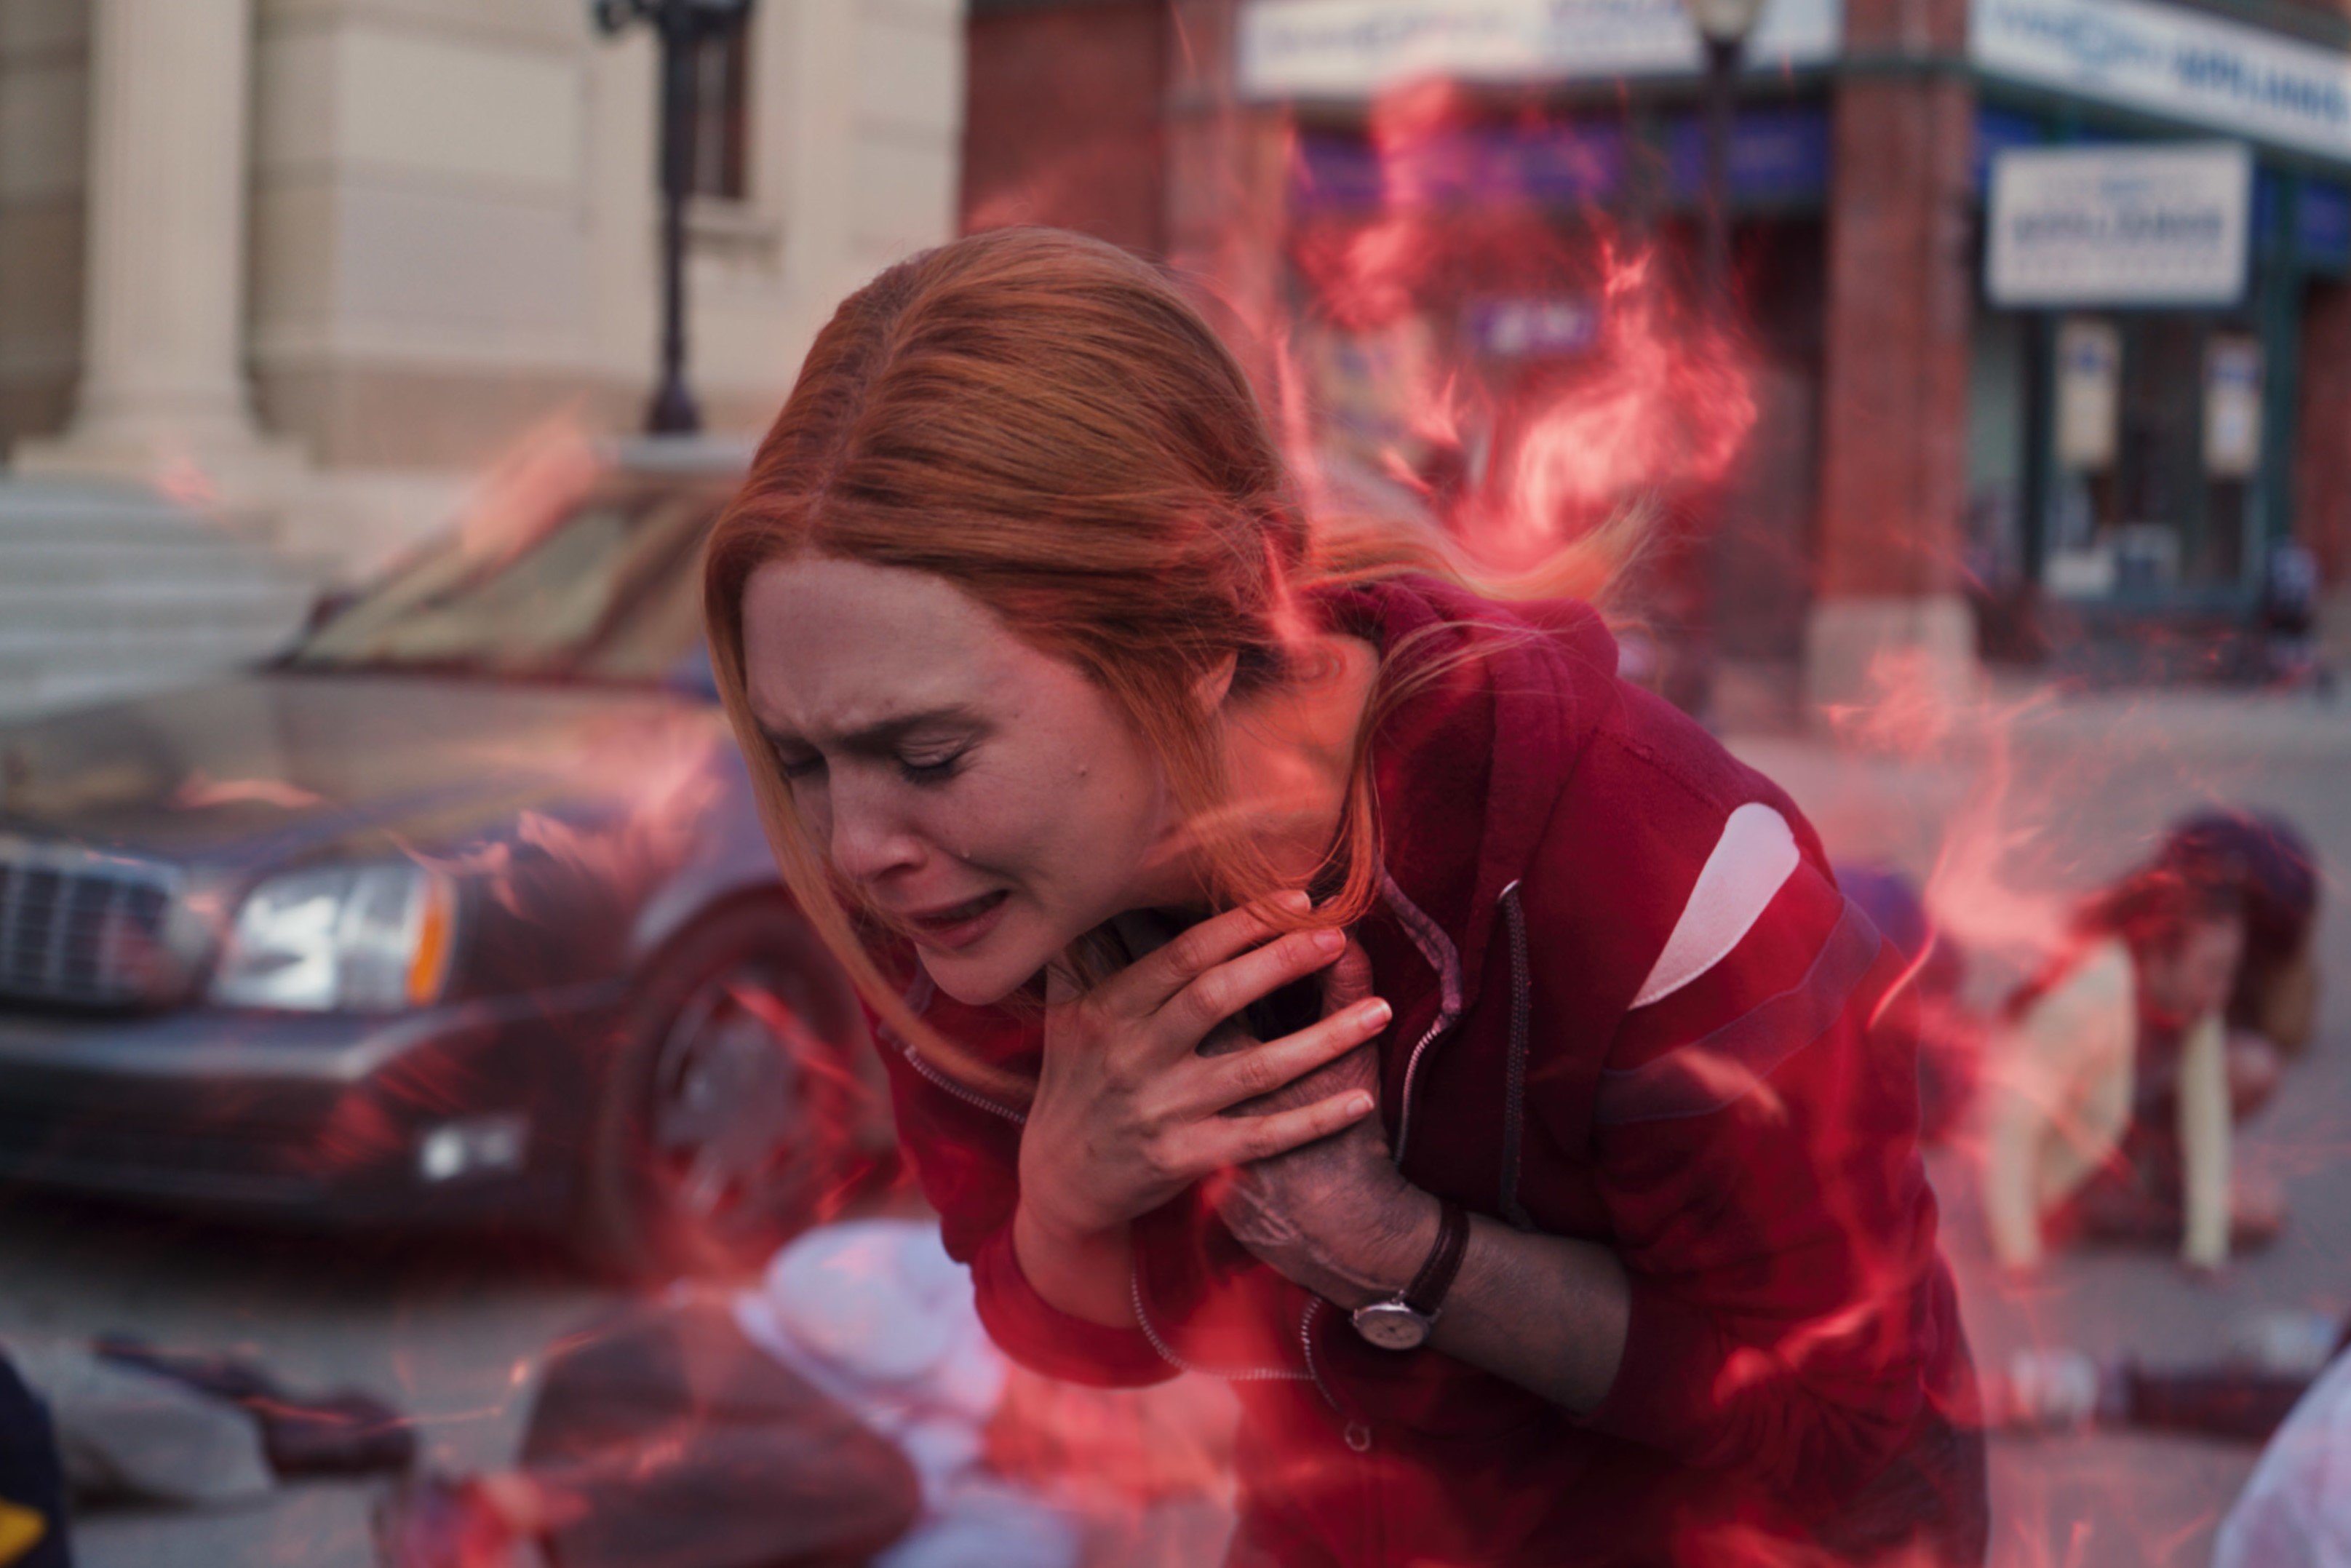 'Doctor Strange 2' star Elizabeth Olsen, in character as Scarlet Witch, wears a red hoodie. She is surrounded by red magic in the photo as she bends over and clutches her chest.